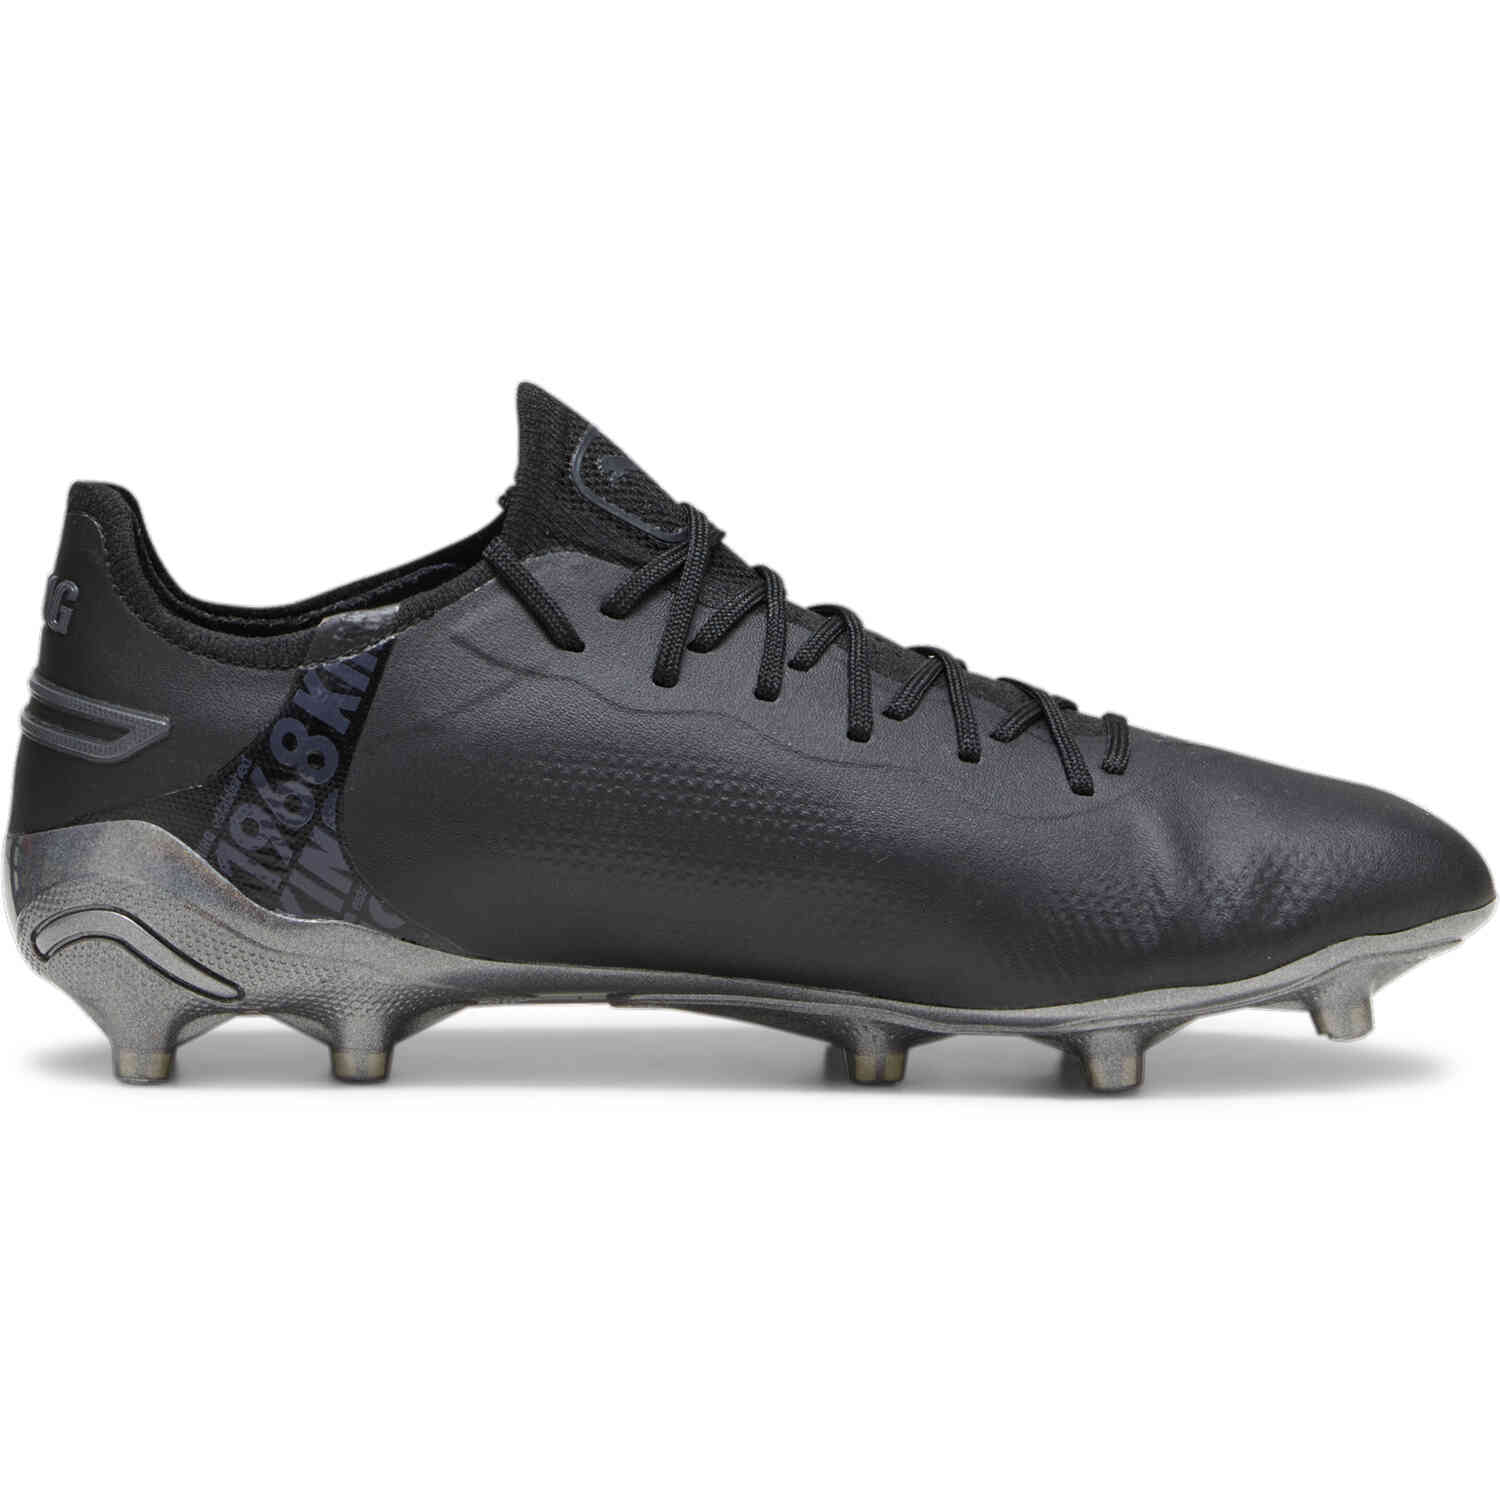 Puma King Ultimate FG – Eclipse Pack